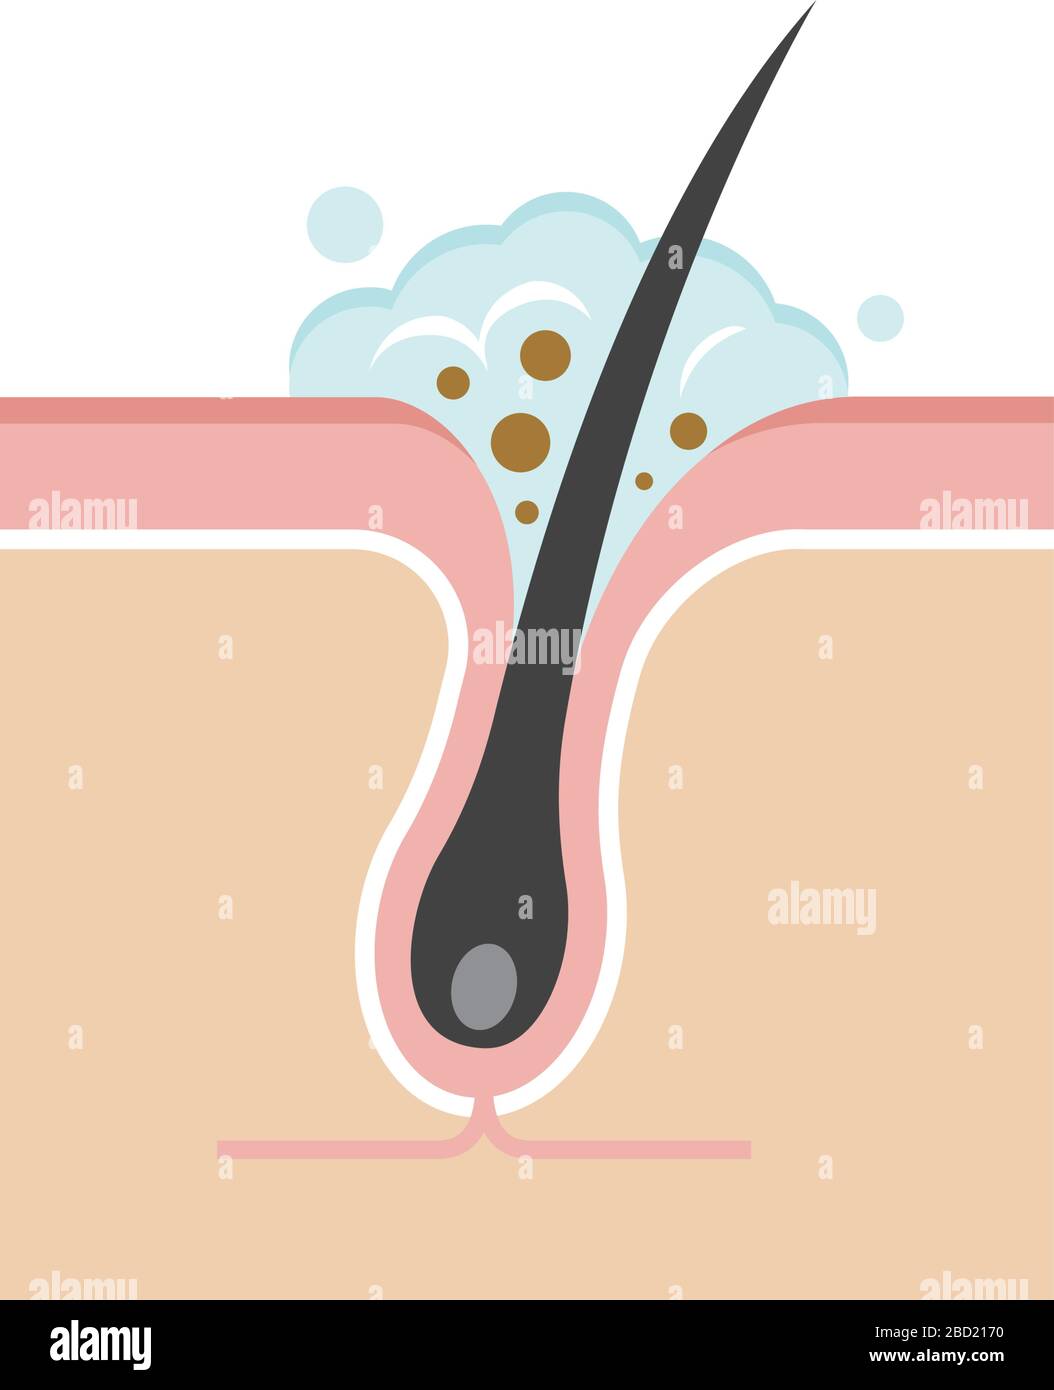 Structure illustration of pores /cleansing, clear keratotic plug (whitehead). Stock Vector